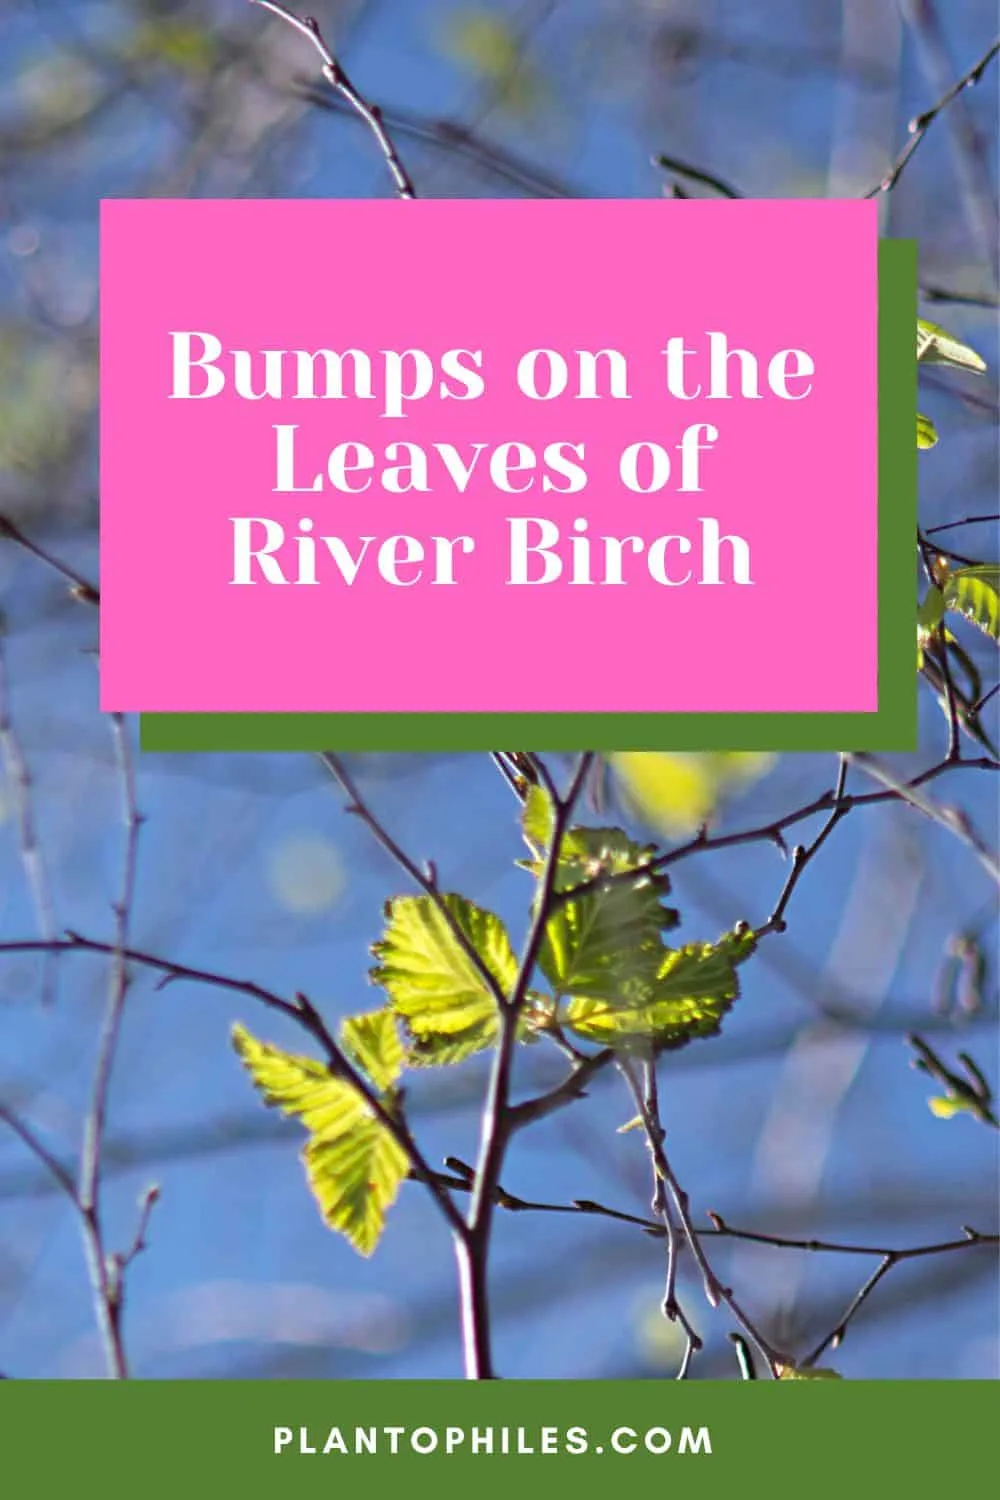 Bumps on the Leaves of River Birch